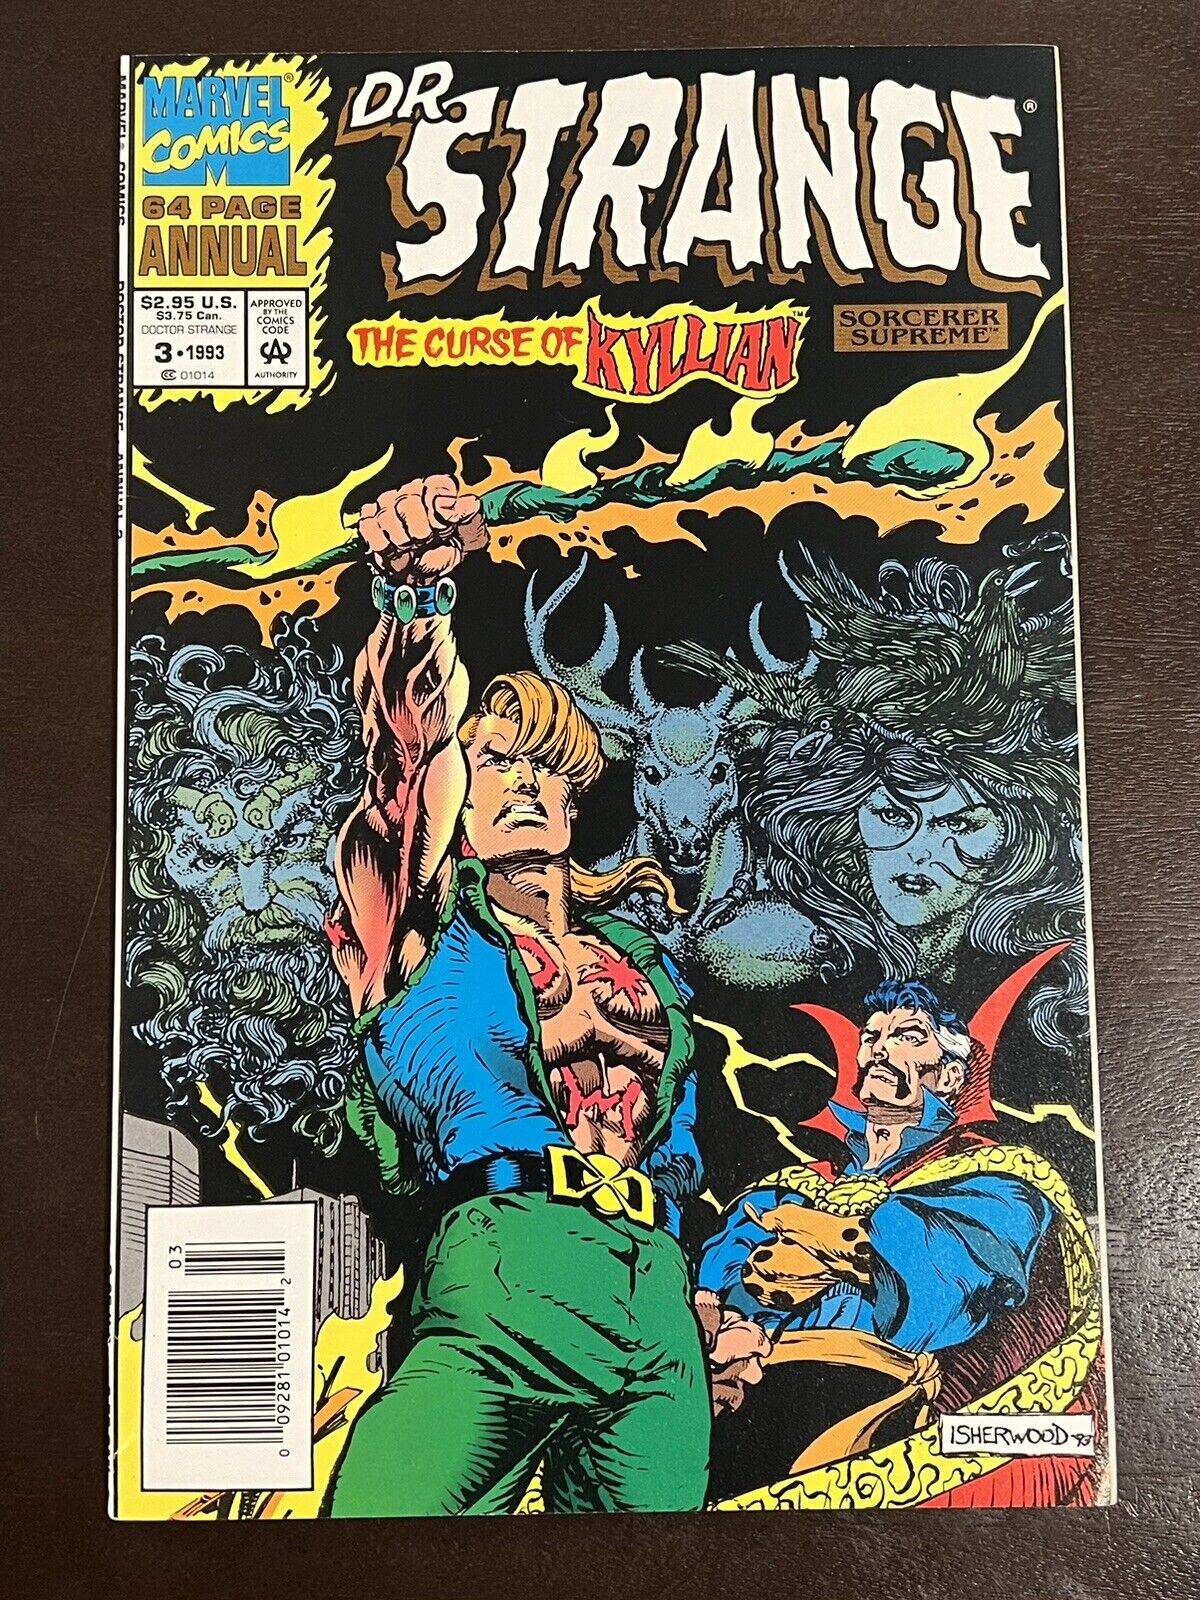 MarveL Dr Strange Annual #3 NM NEWSSTAND EDITION 1993 w/ TRADING CARD